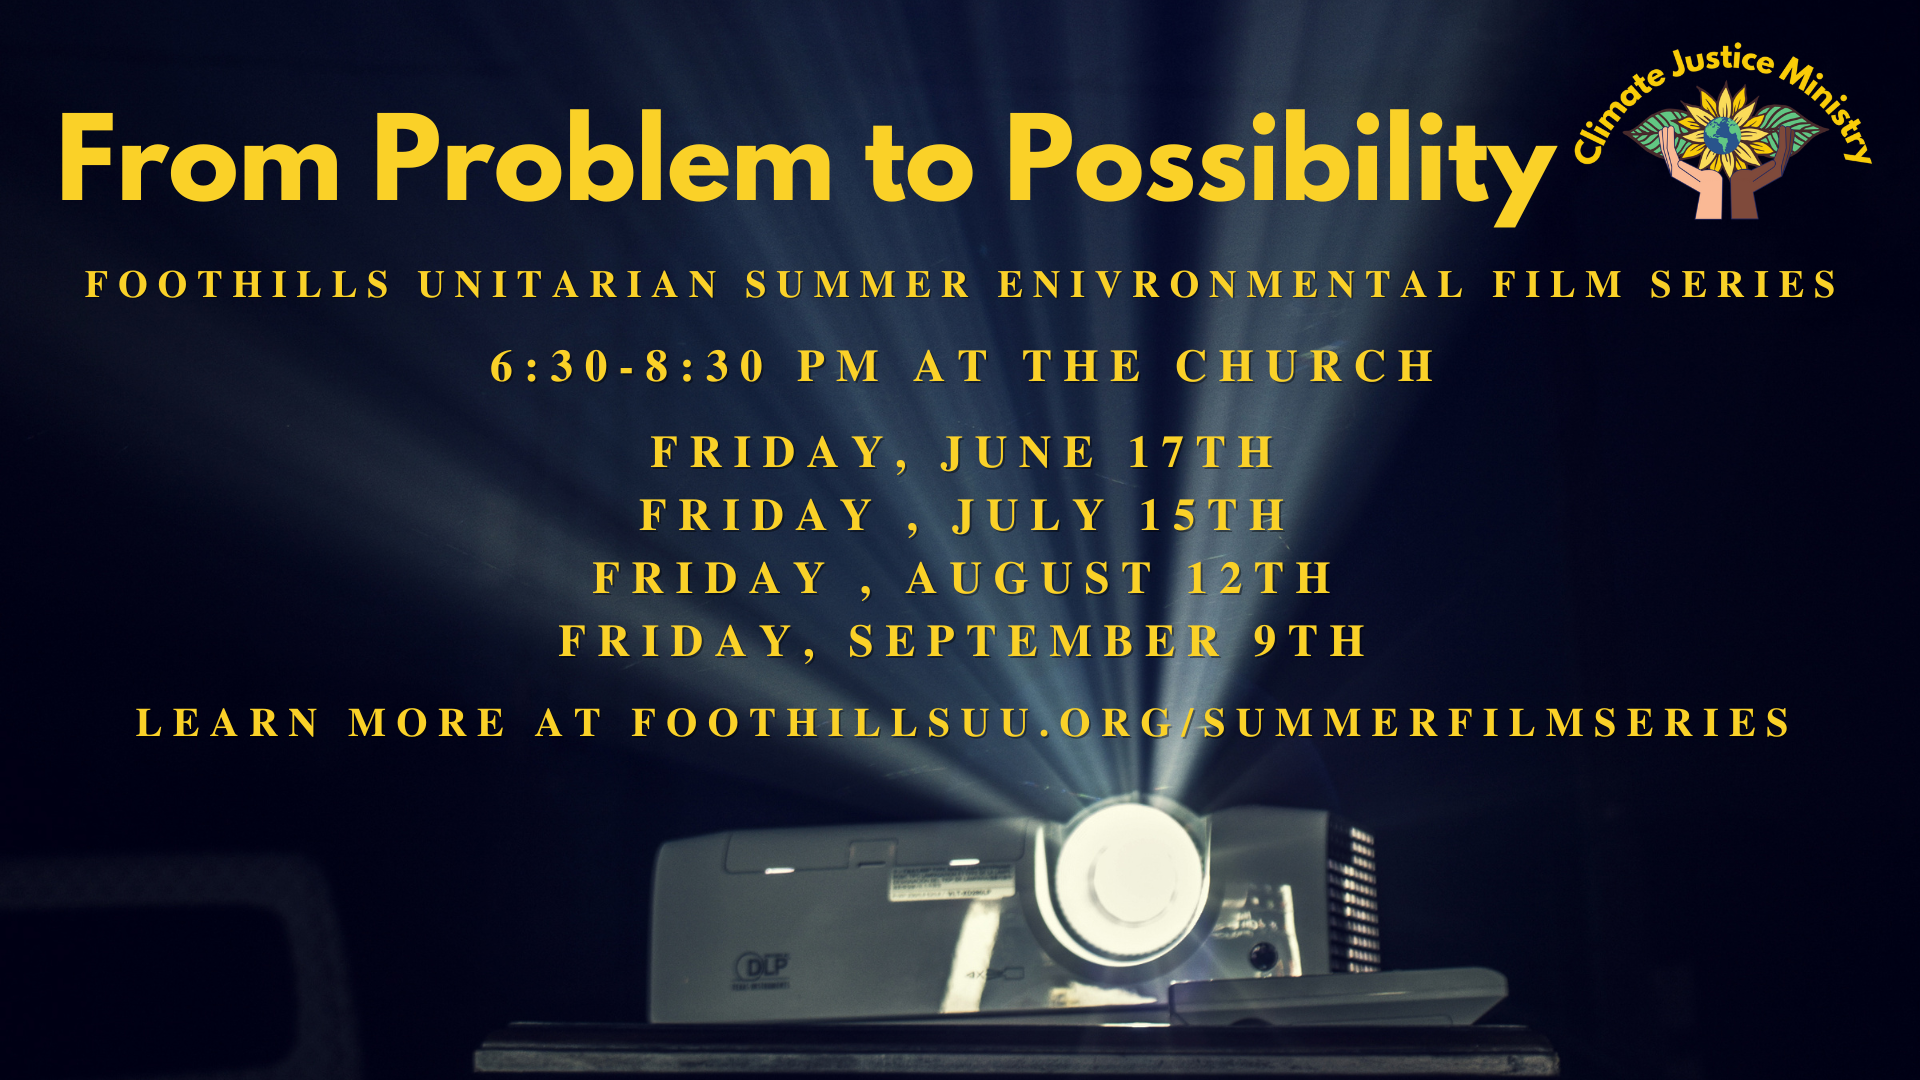 From Problem to Possibility: Foothills Summer Environmental Film Series